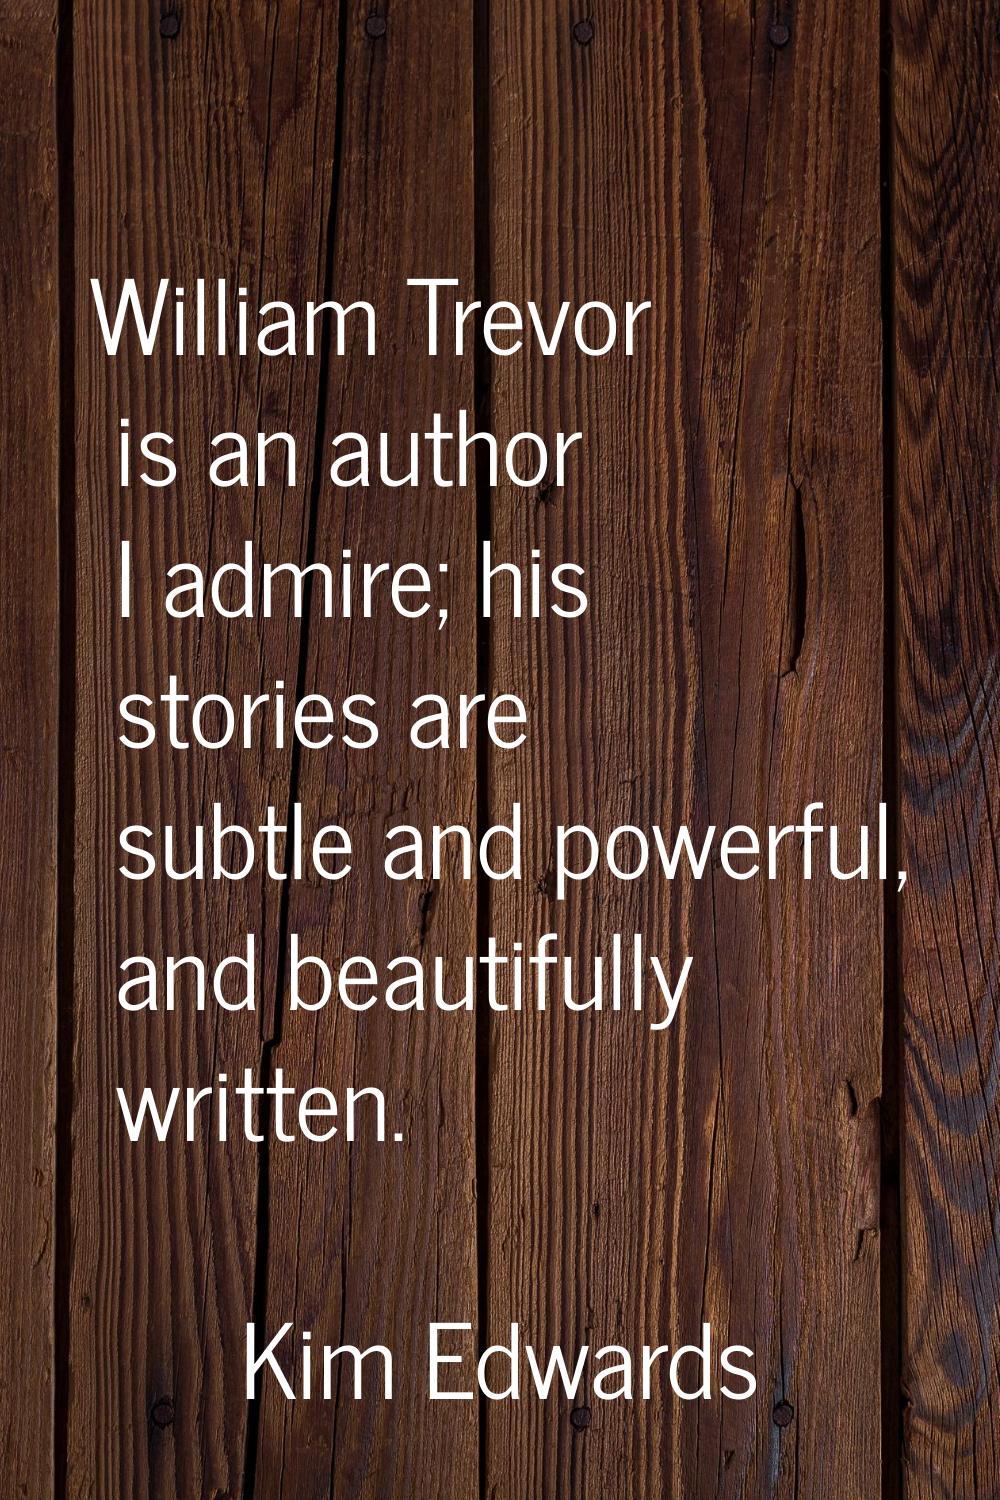 William Trevor is an author I admire; his stories are subtle and powerful, and beautifully written.